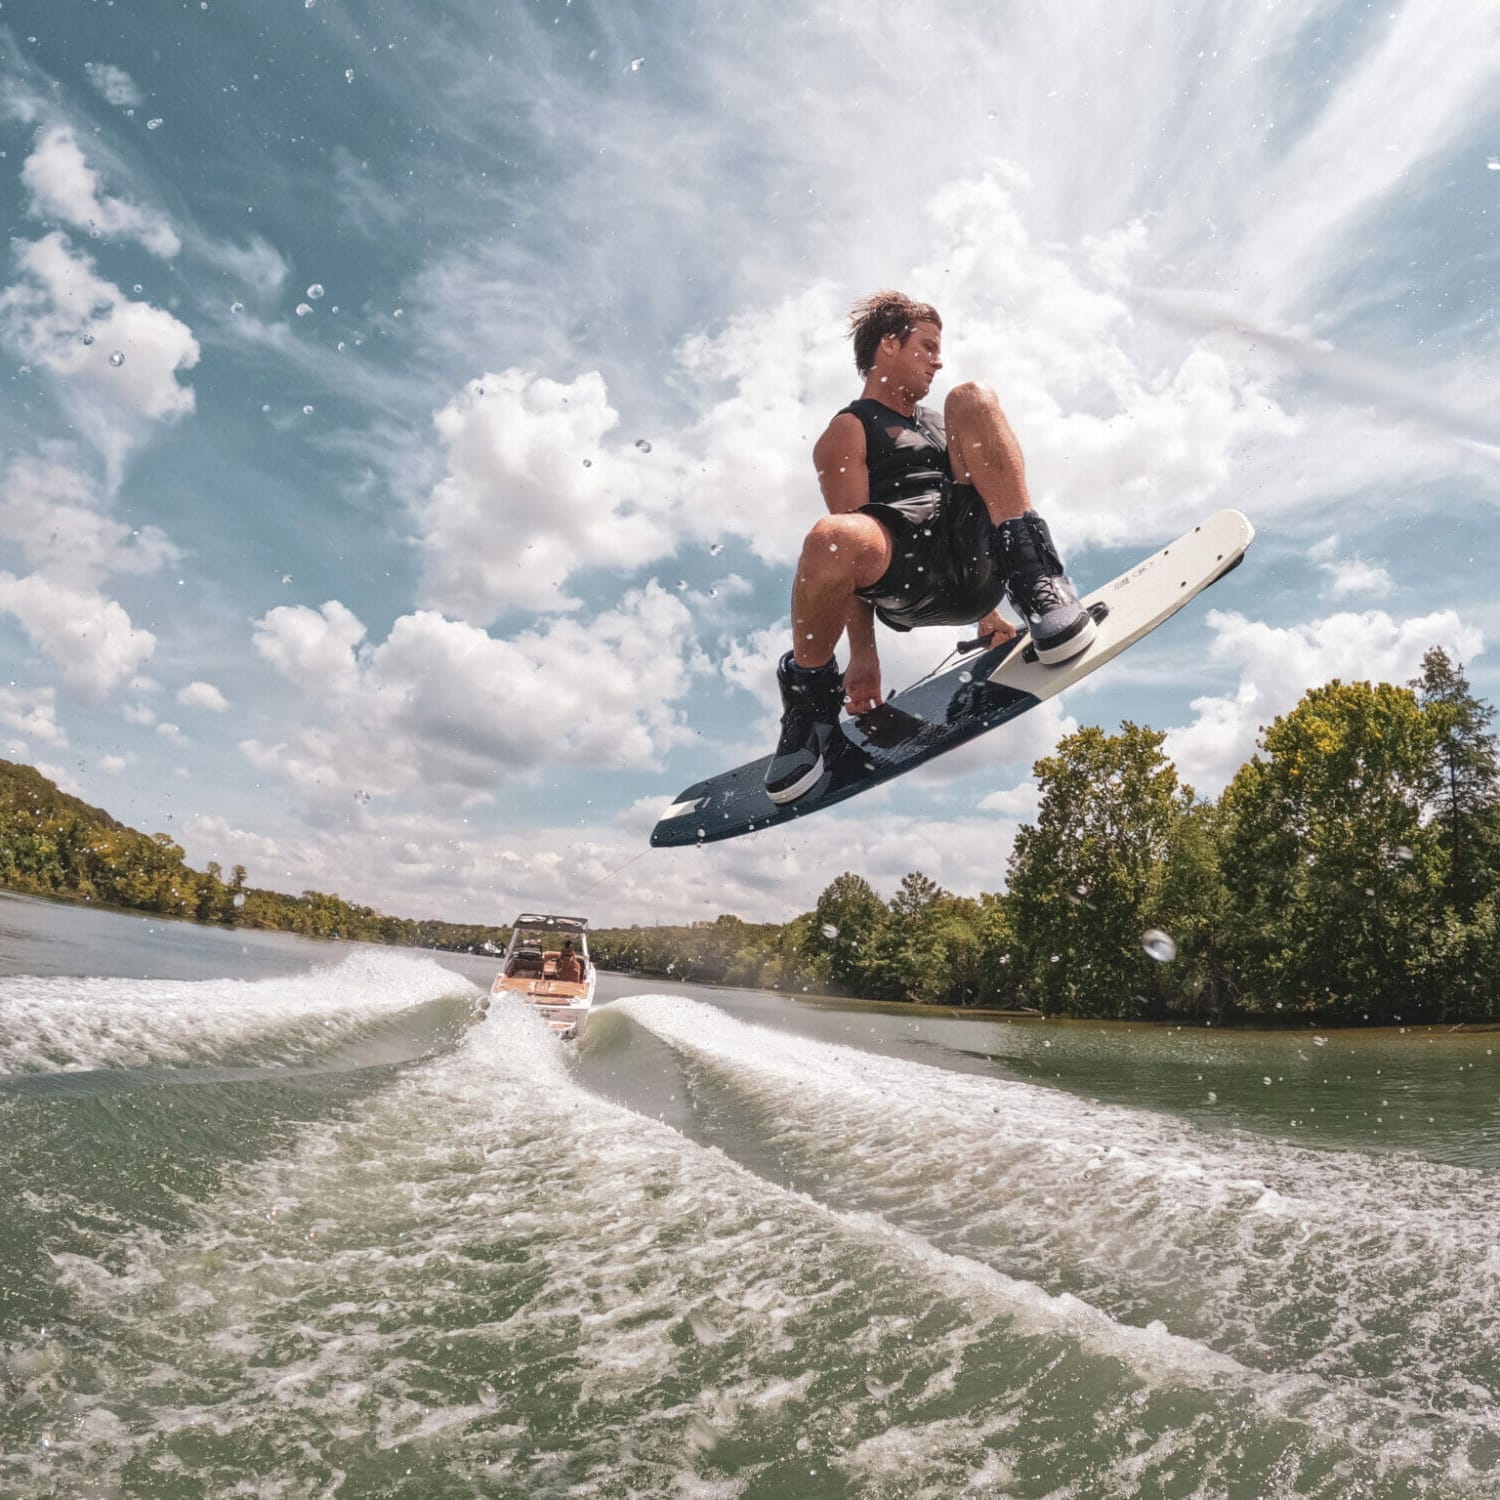 A man is riding a wakeboard behind a wakeboat on a lake.